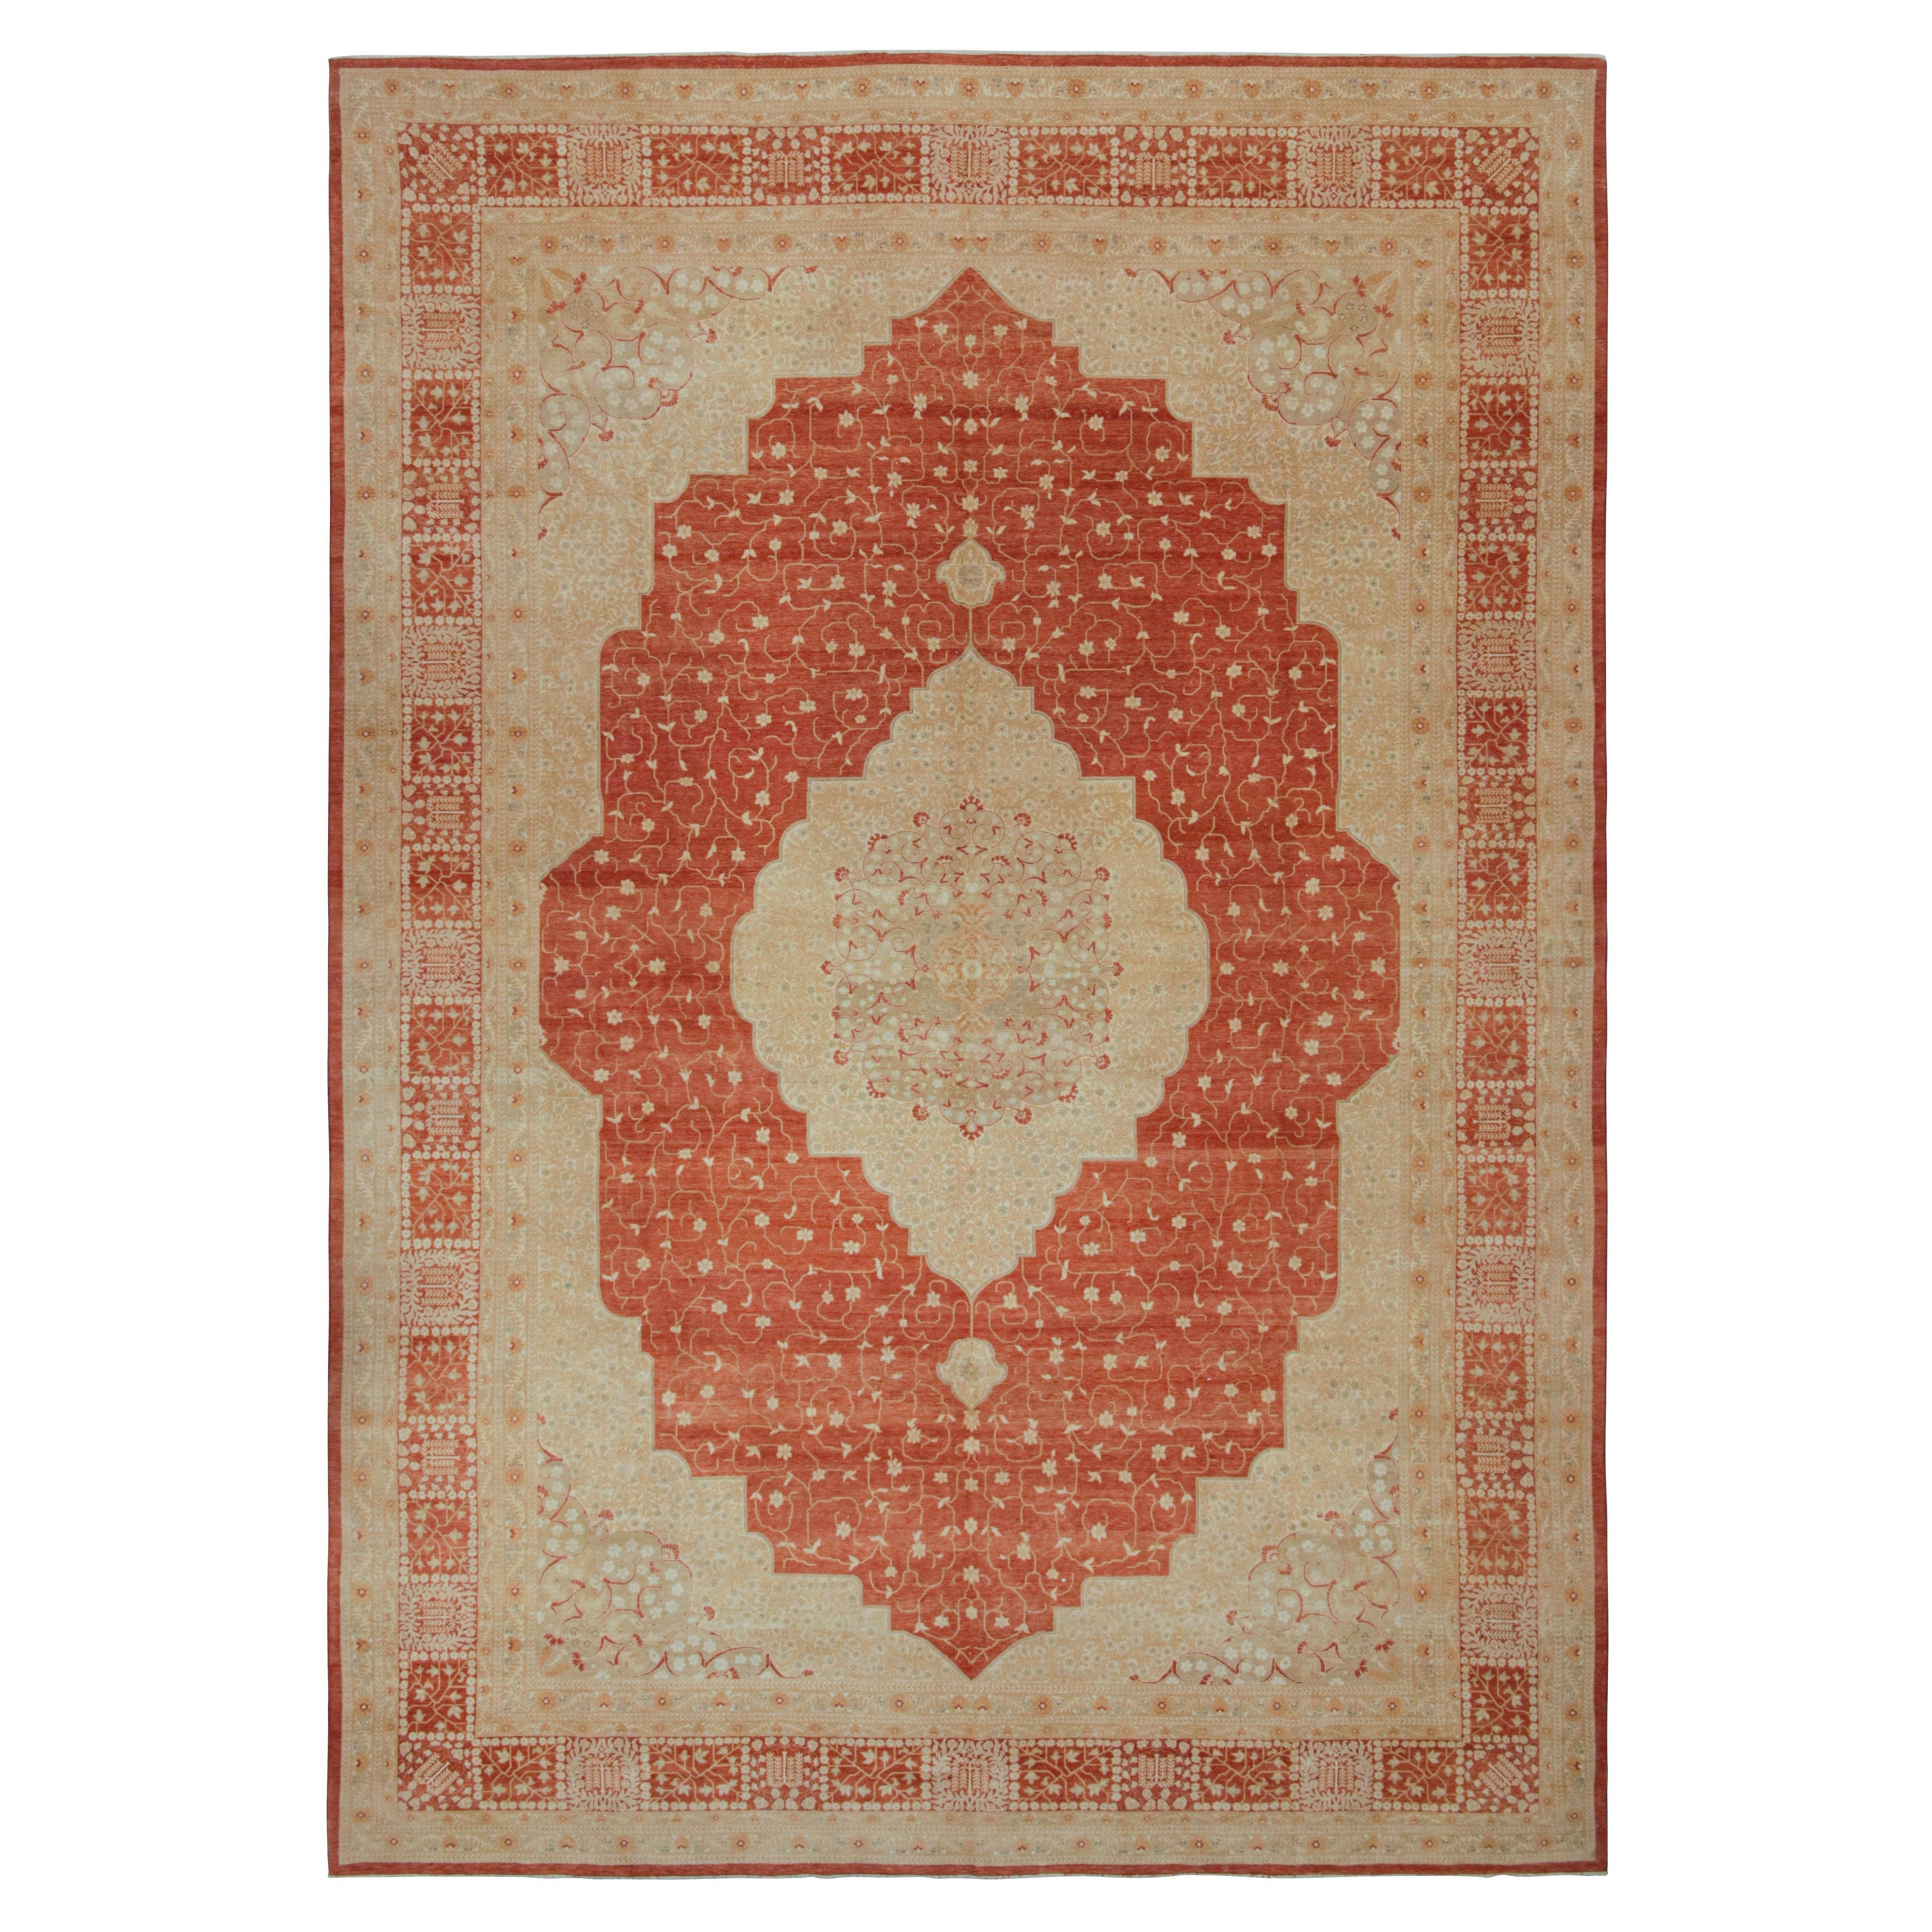 Rug & Kilim’s Tabriz Style Rug in Gold Brown and Red Medallion Pattern